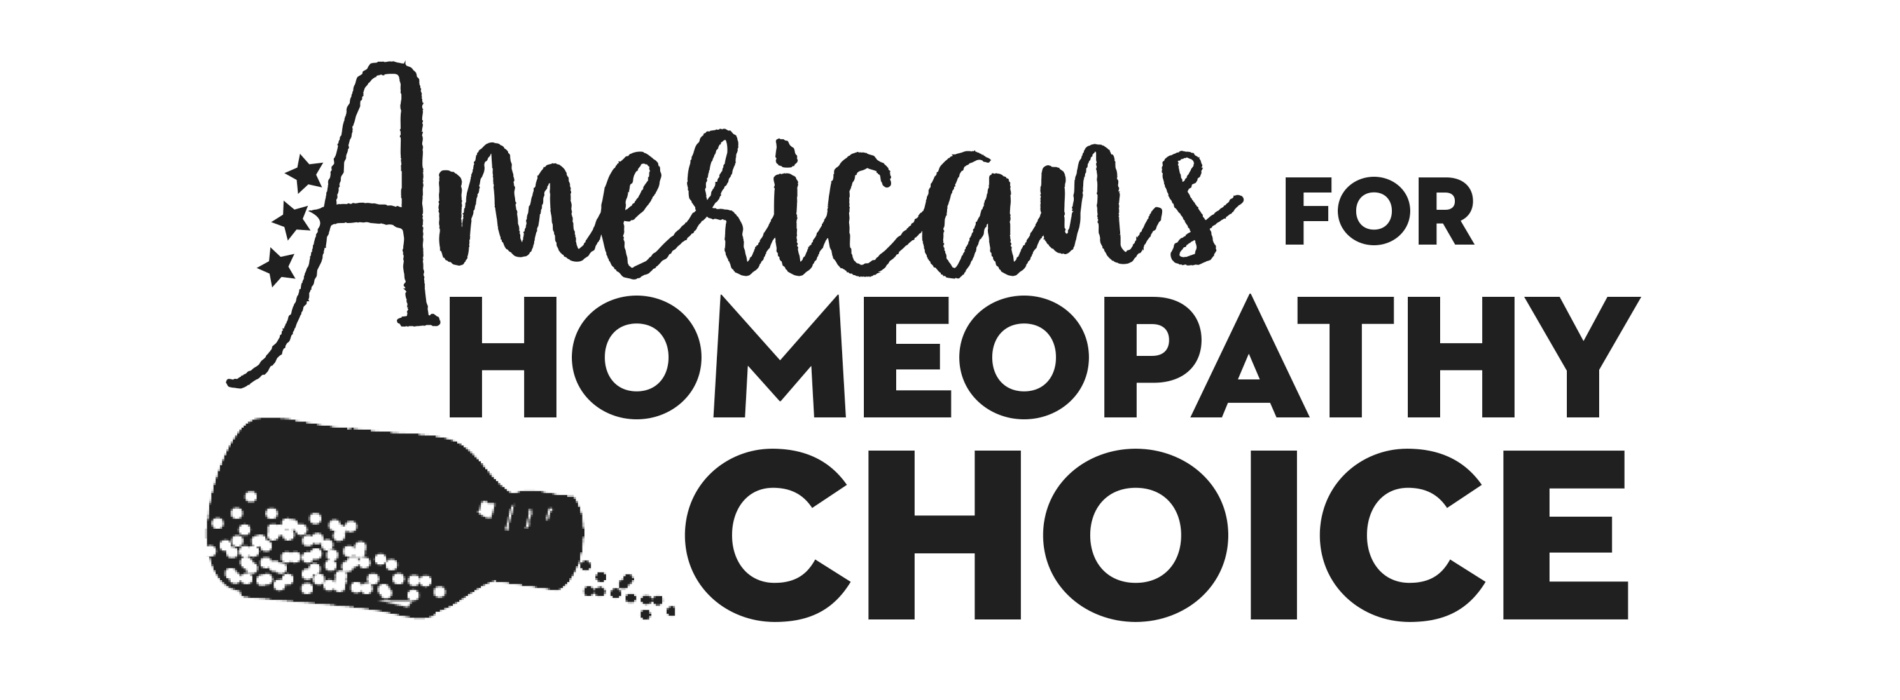 Americans for homeopathy choice